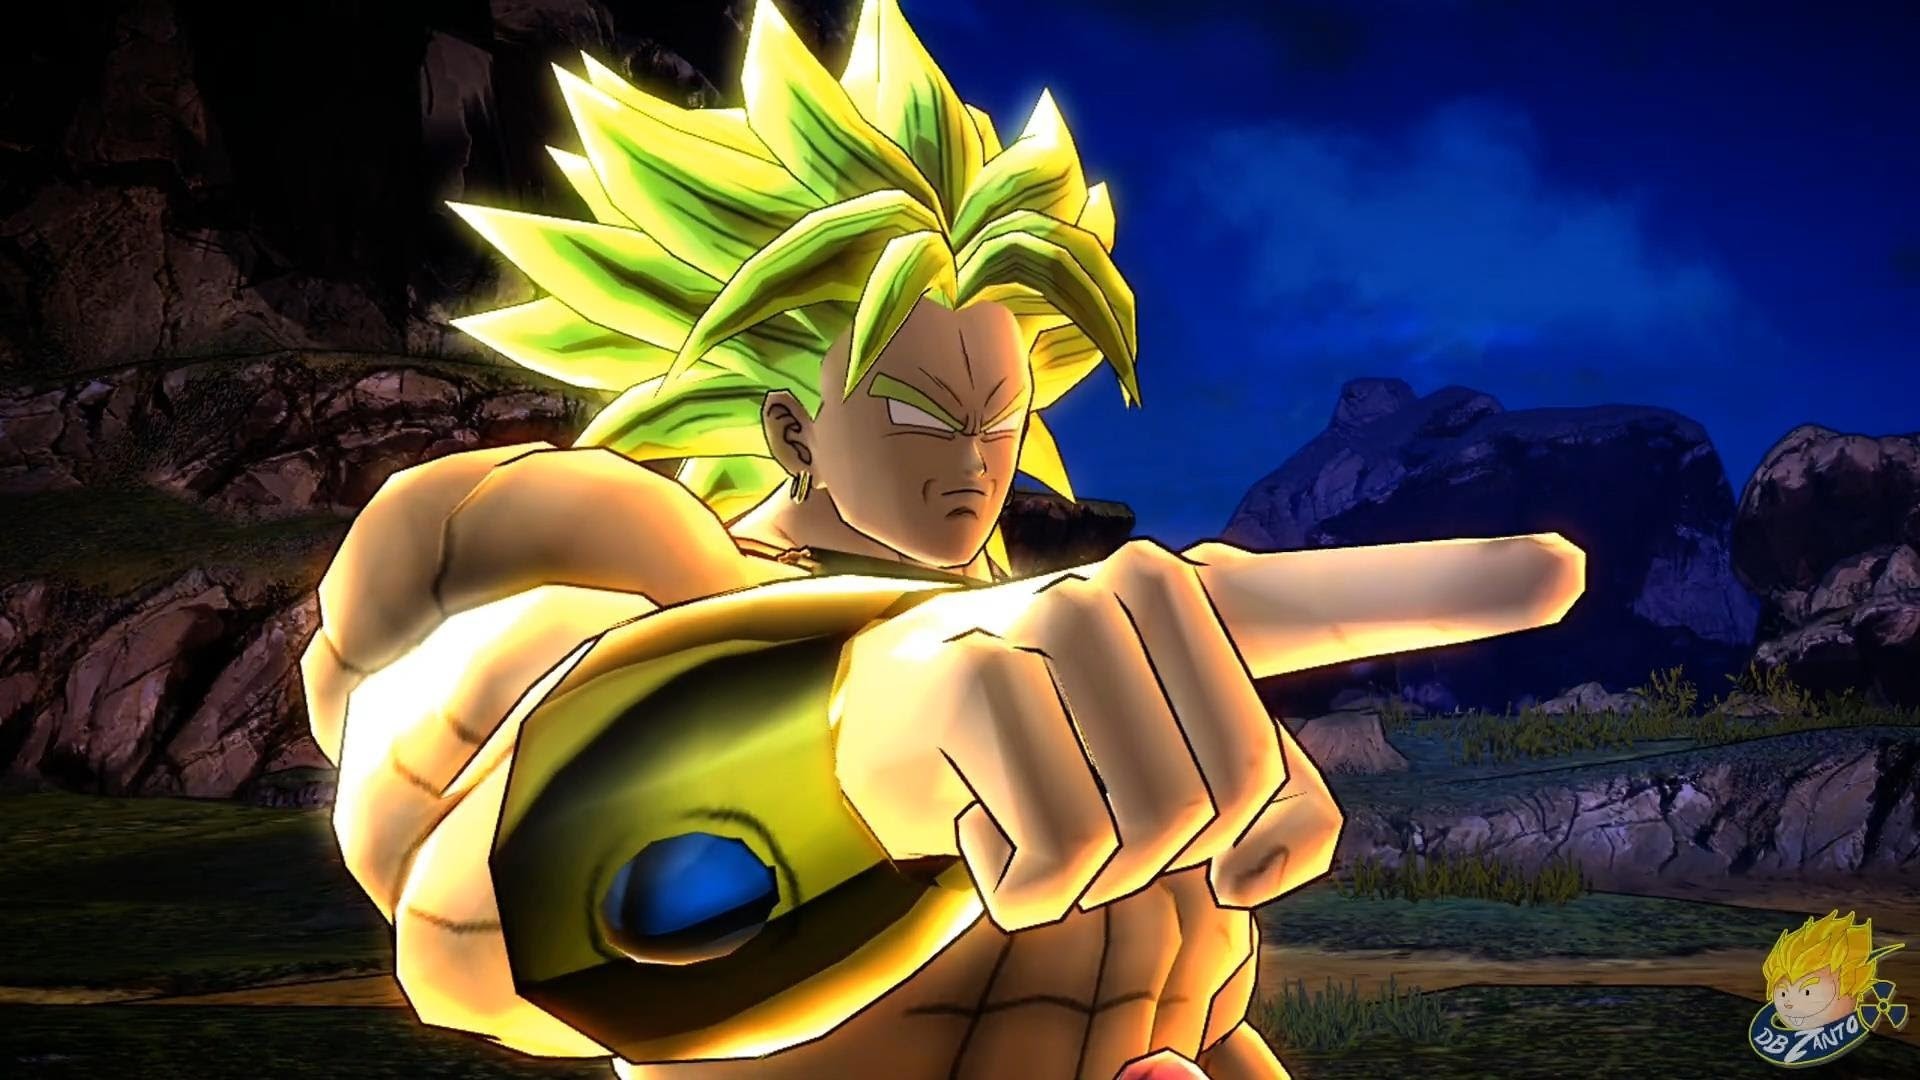 1920x1080 20 Best Broly Images On Dragonball Z Goku And Dbz Gt